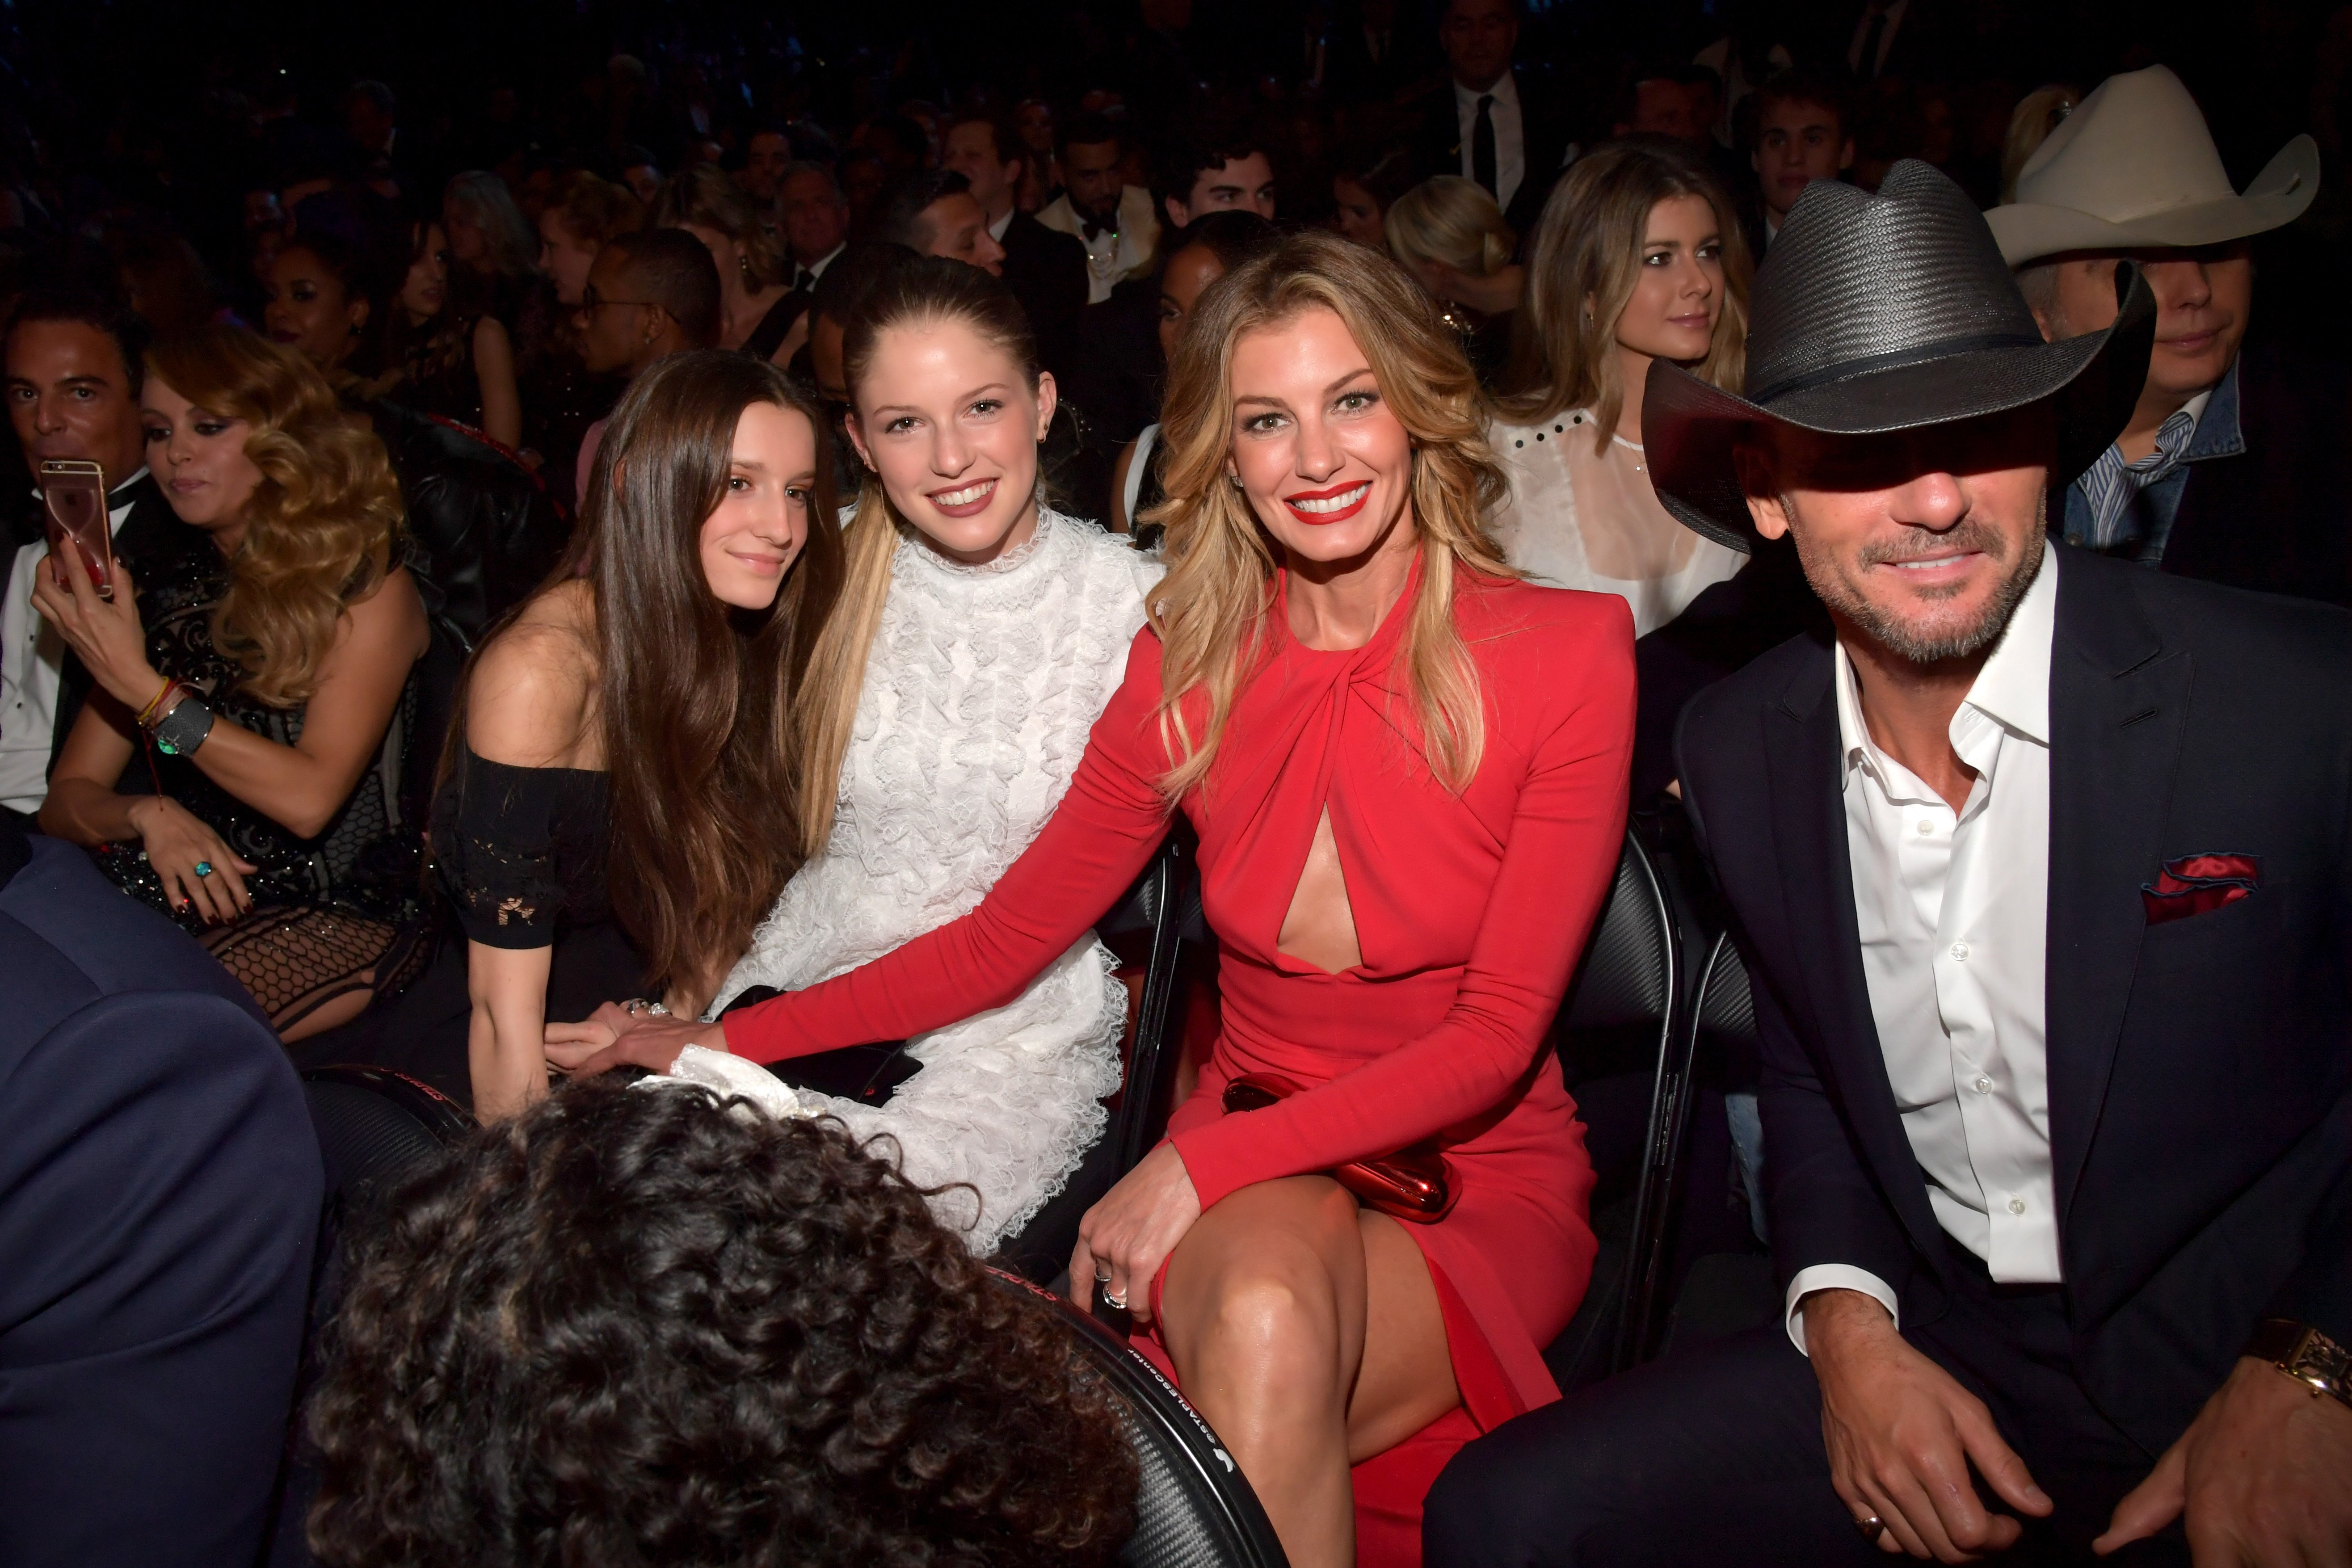 Faith Hill and Tim McGraw, along with their daughters Audrey and Maggie McGraw, attend the 59th Grammy Awards at the Staples Center on February 12, 2017, in Los Angeles, California. | Source: Getty Images